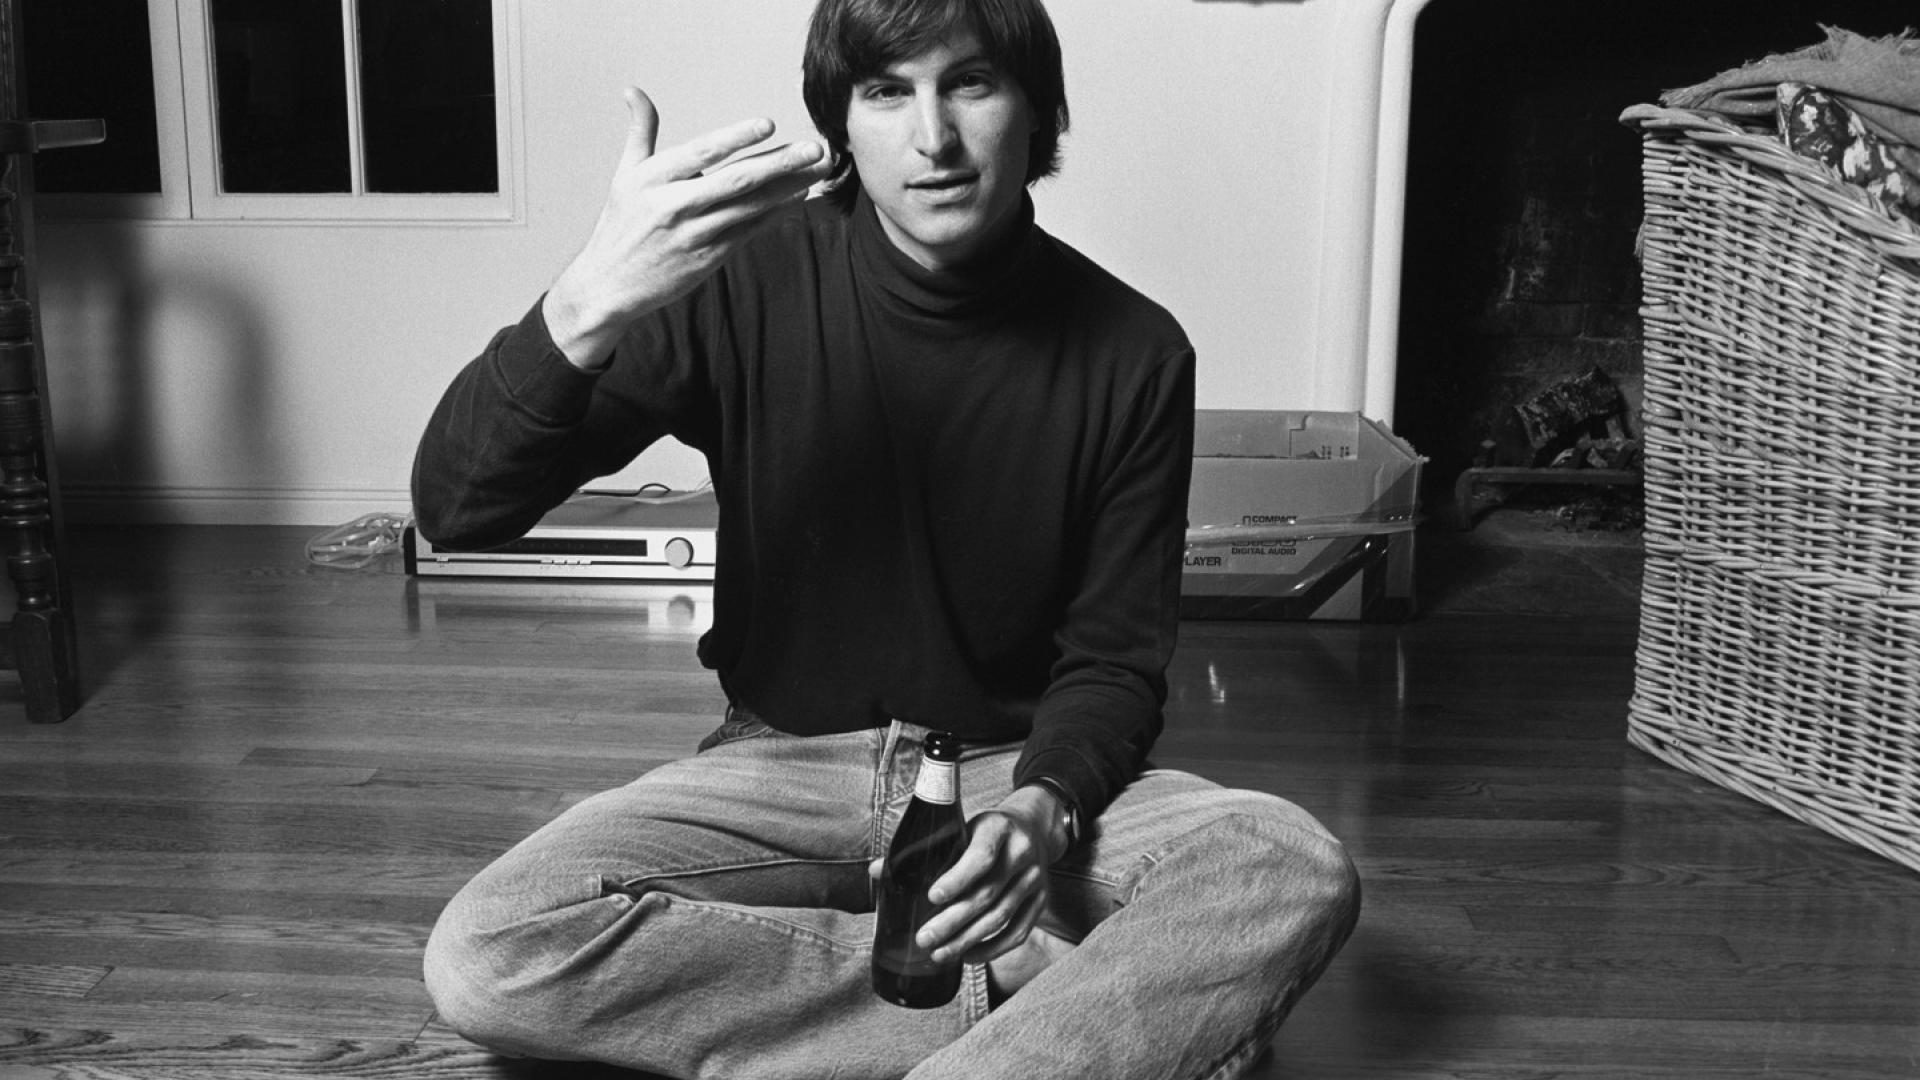 The only way to do great work is to love what you do.” - Steve Jobs